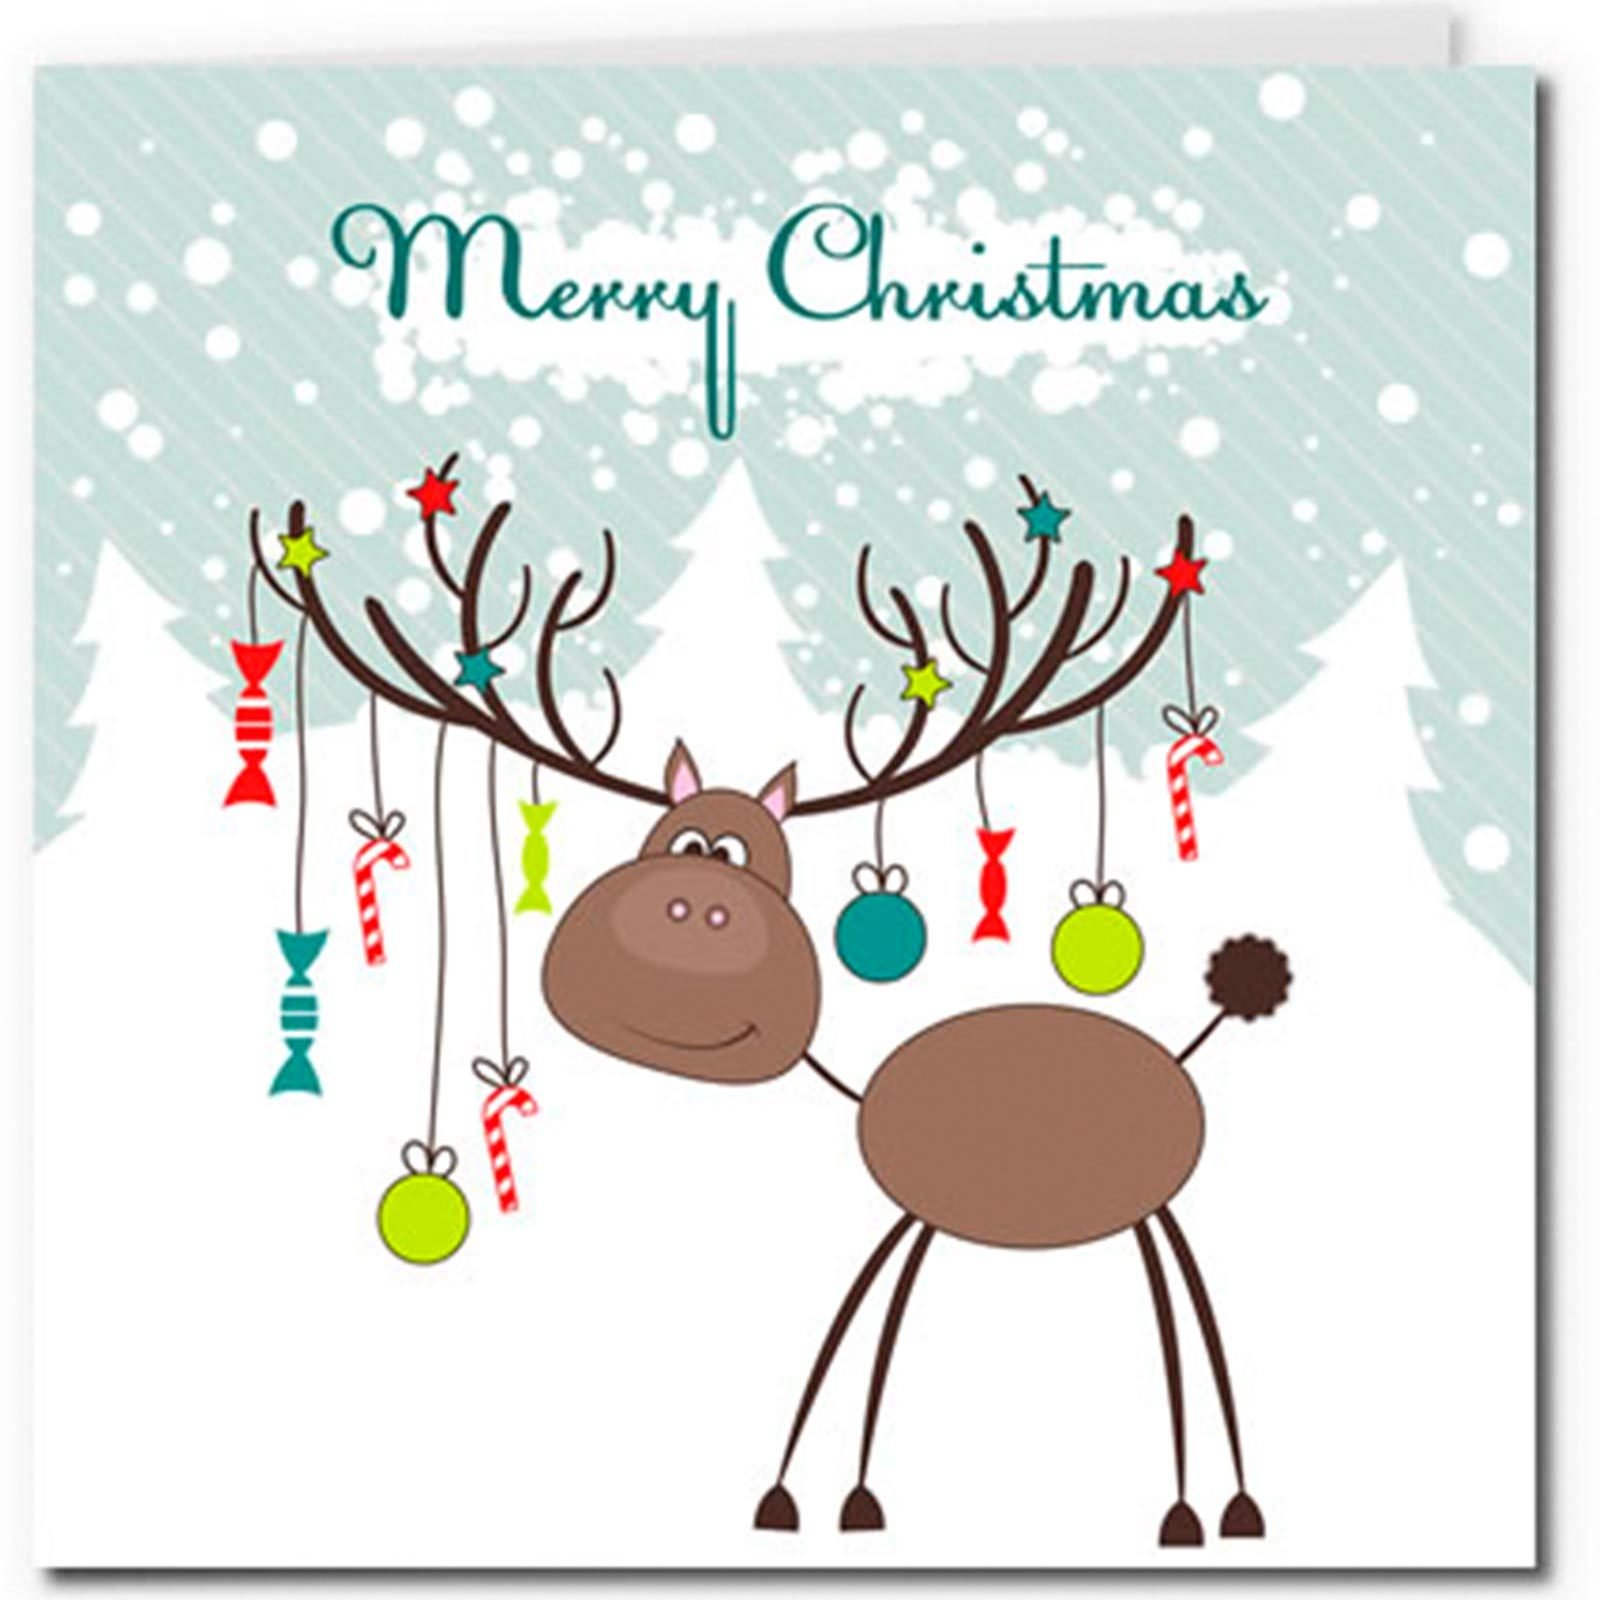 Free Christmas Cards To Print Out And Send This Year Readers Digest